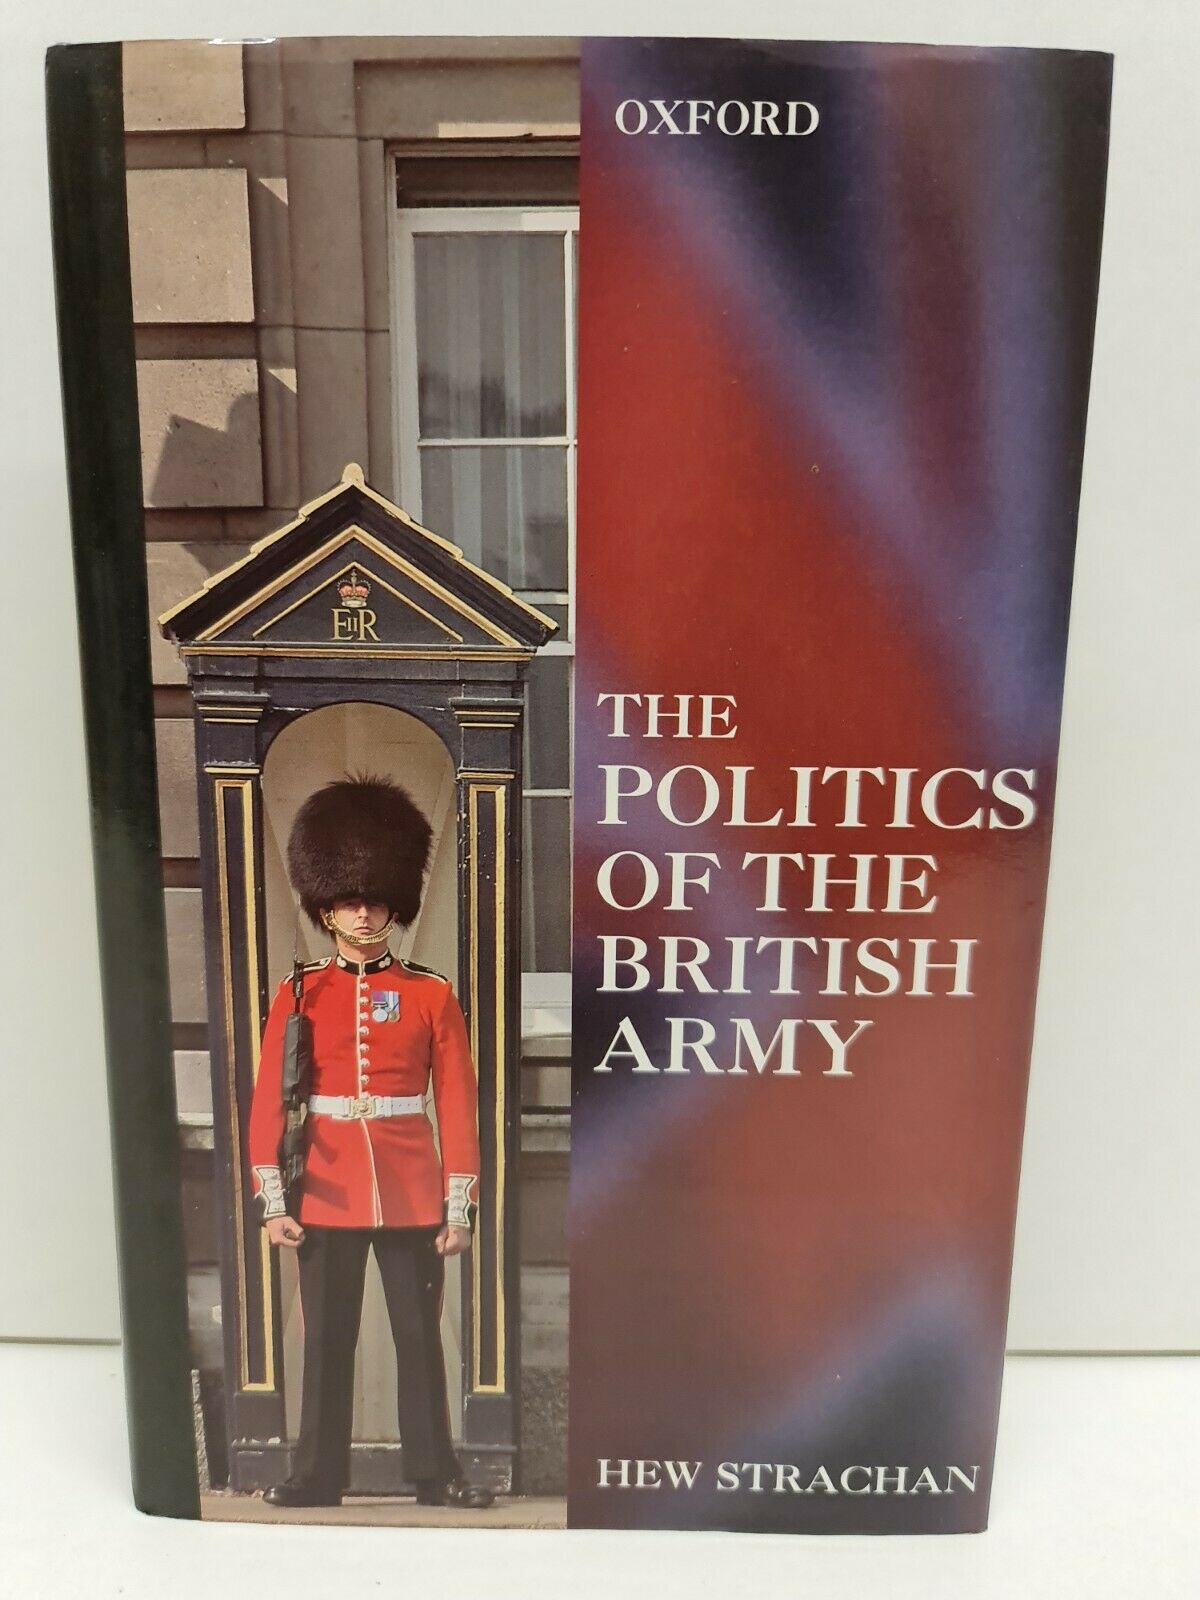 The Politics of the British Army by Sir Hew Strachan